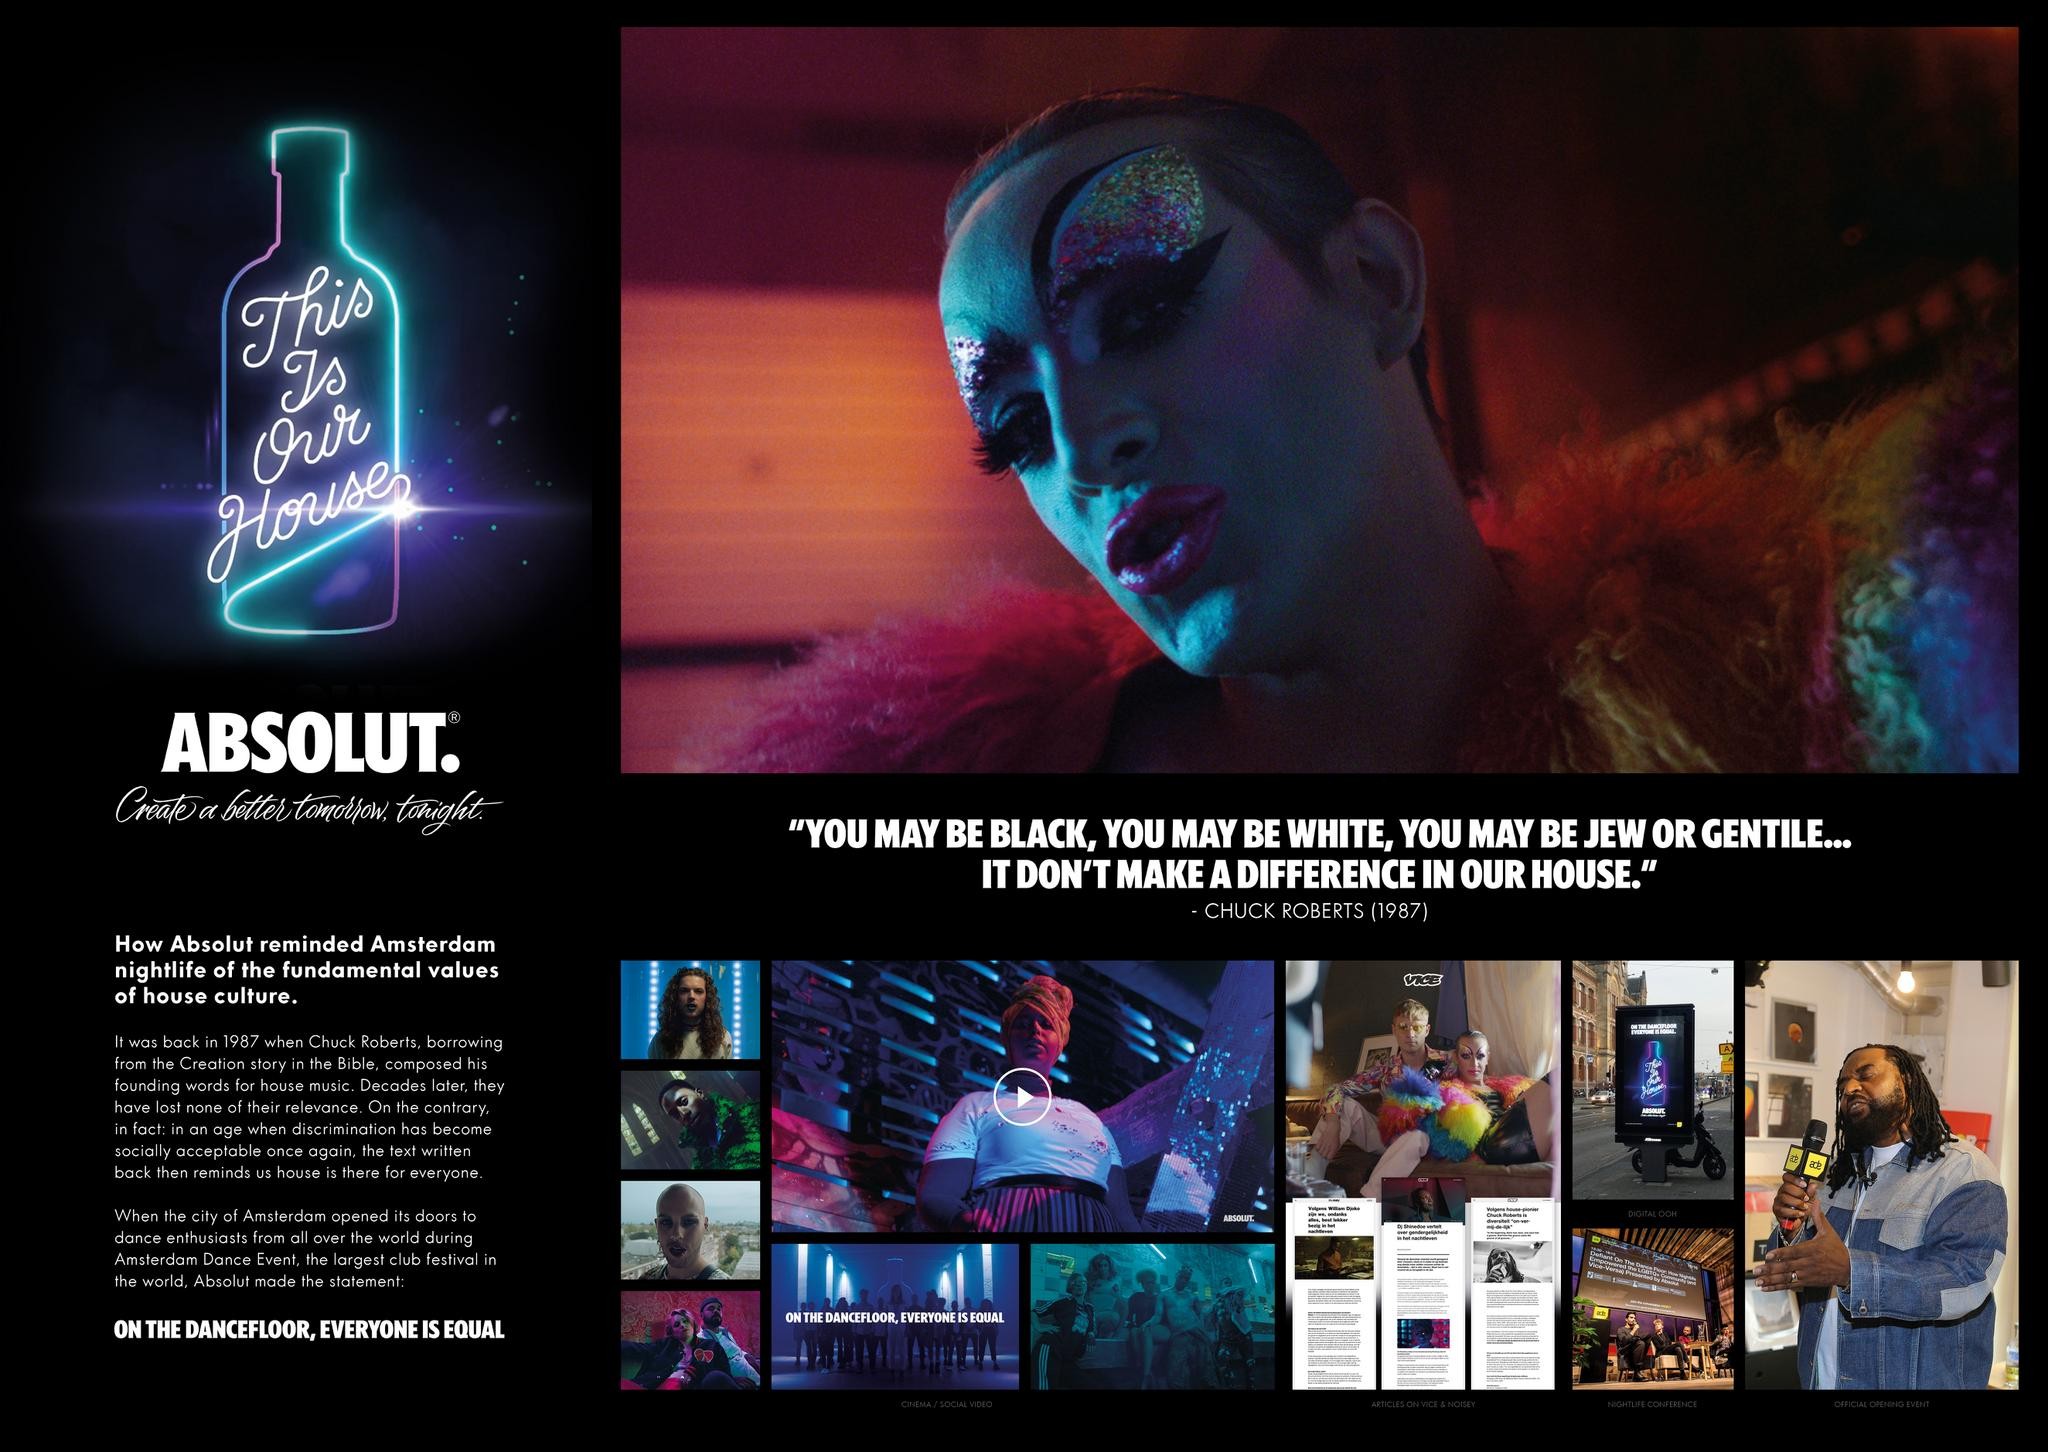 Absolut - #thisisourhouse